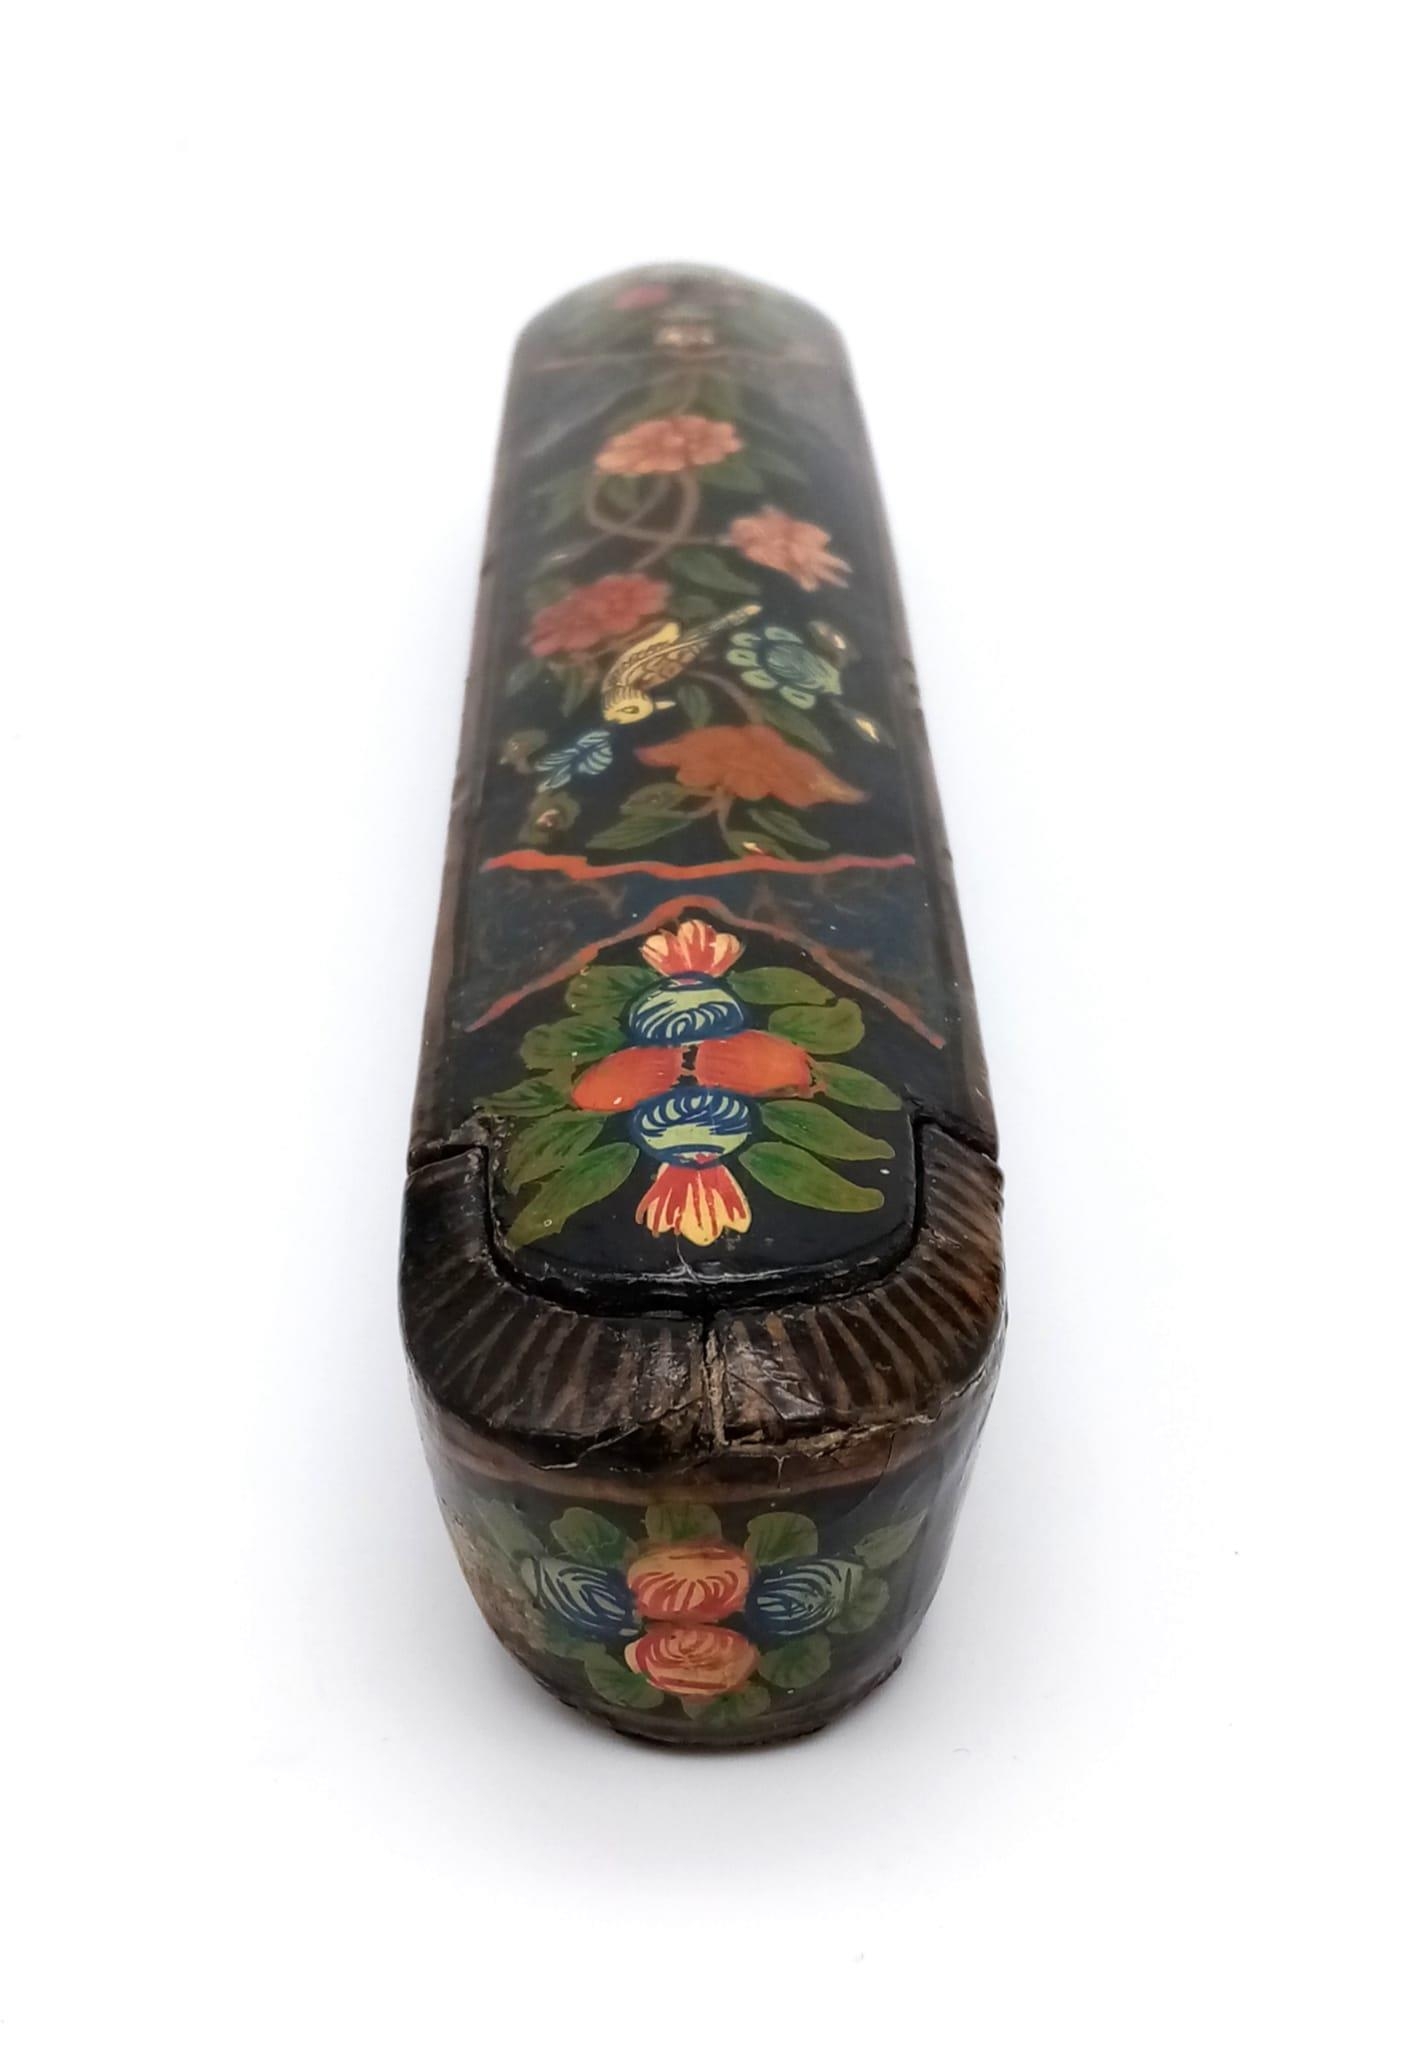 An early Persian Islamic Ghajavi pen box, known as Gol o Bol Boll. Hand painted with flowers and - Image 6 of 7